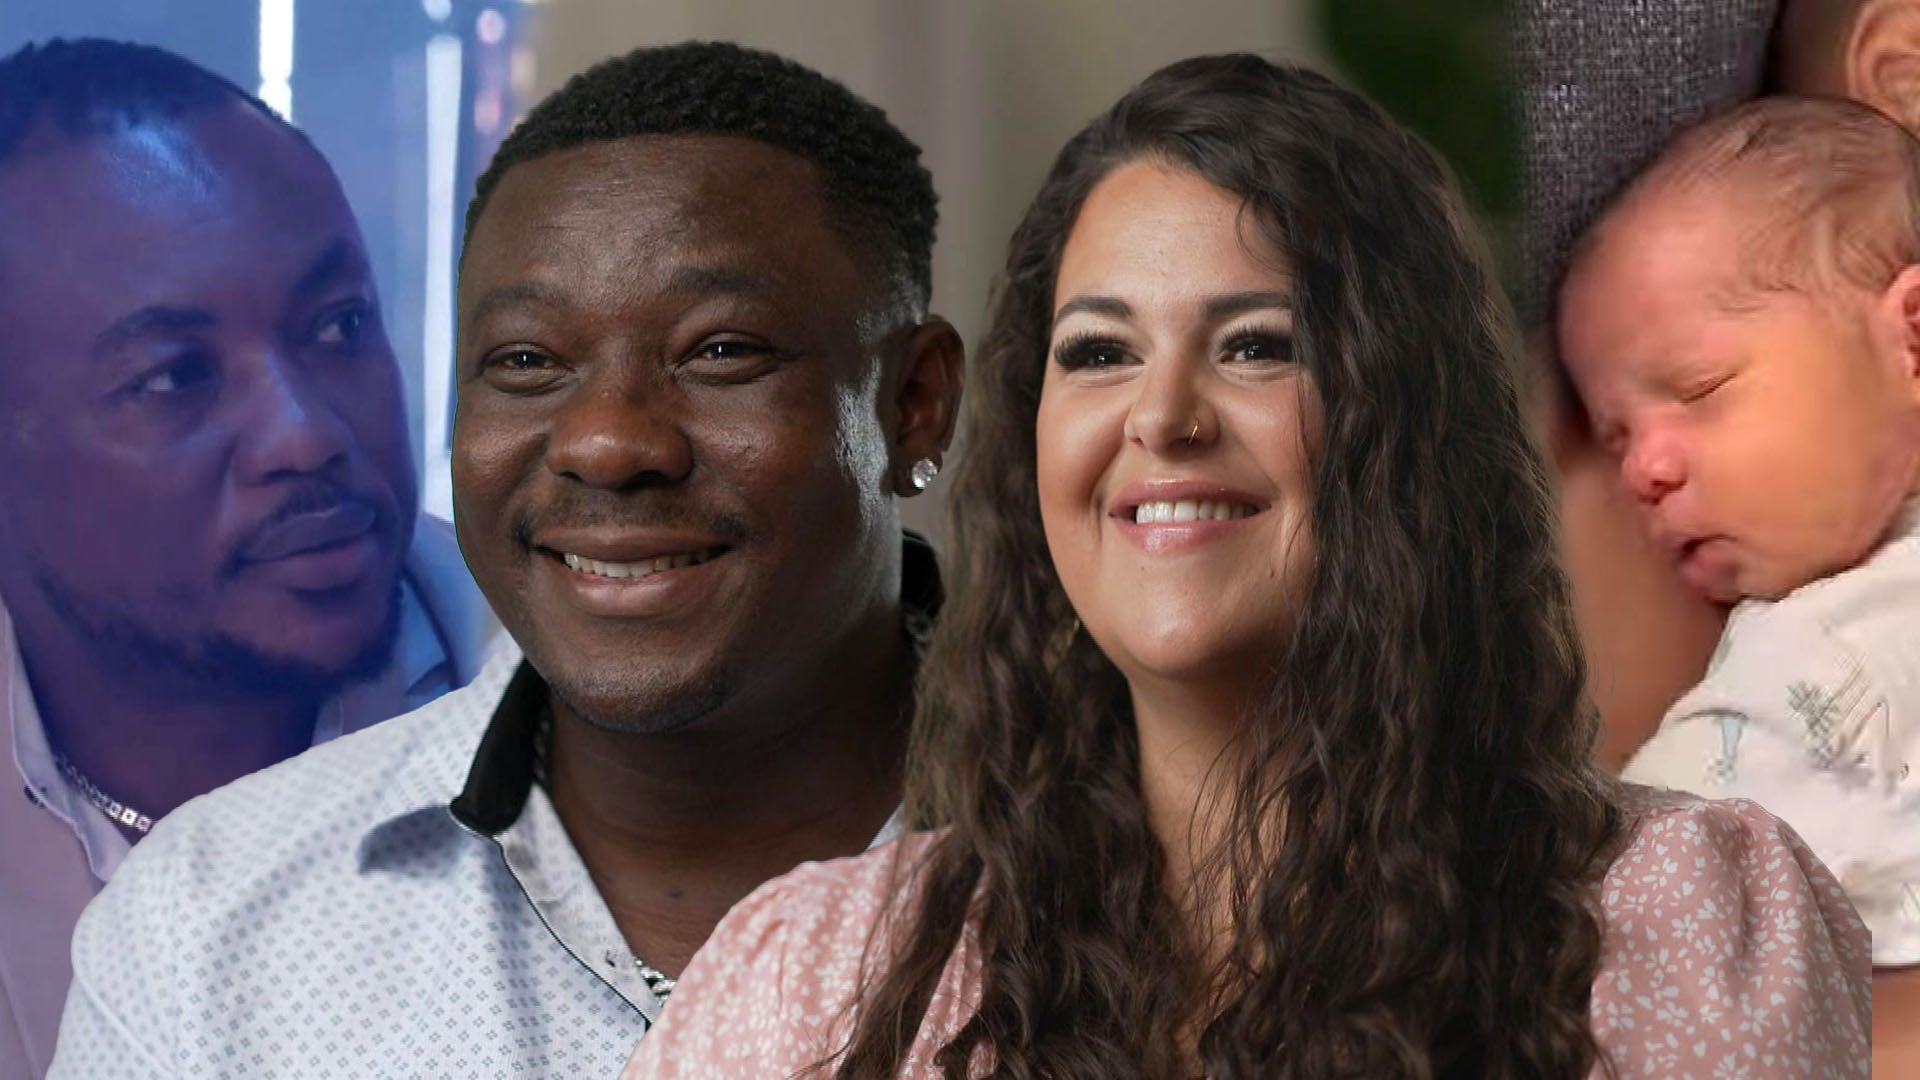 '90 Day Fiancé': Emily and Kobe on Their New Baby and Her Beef With Kobe's Friends (Exclusive)